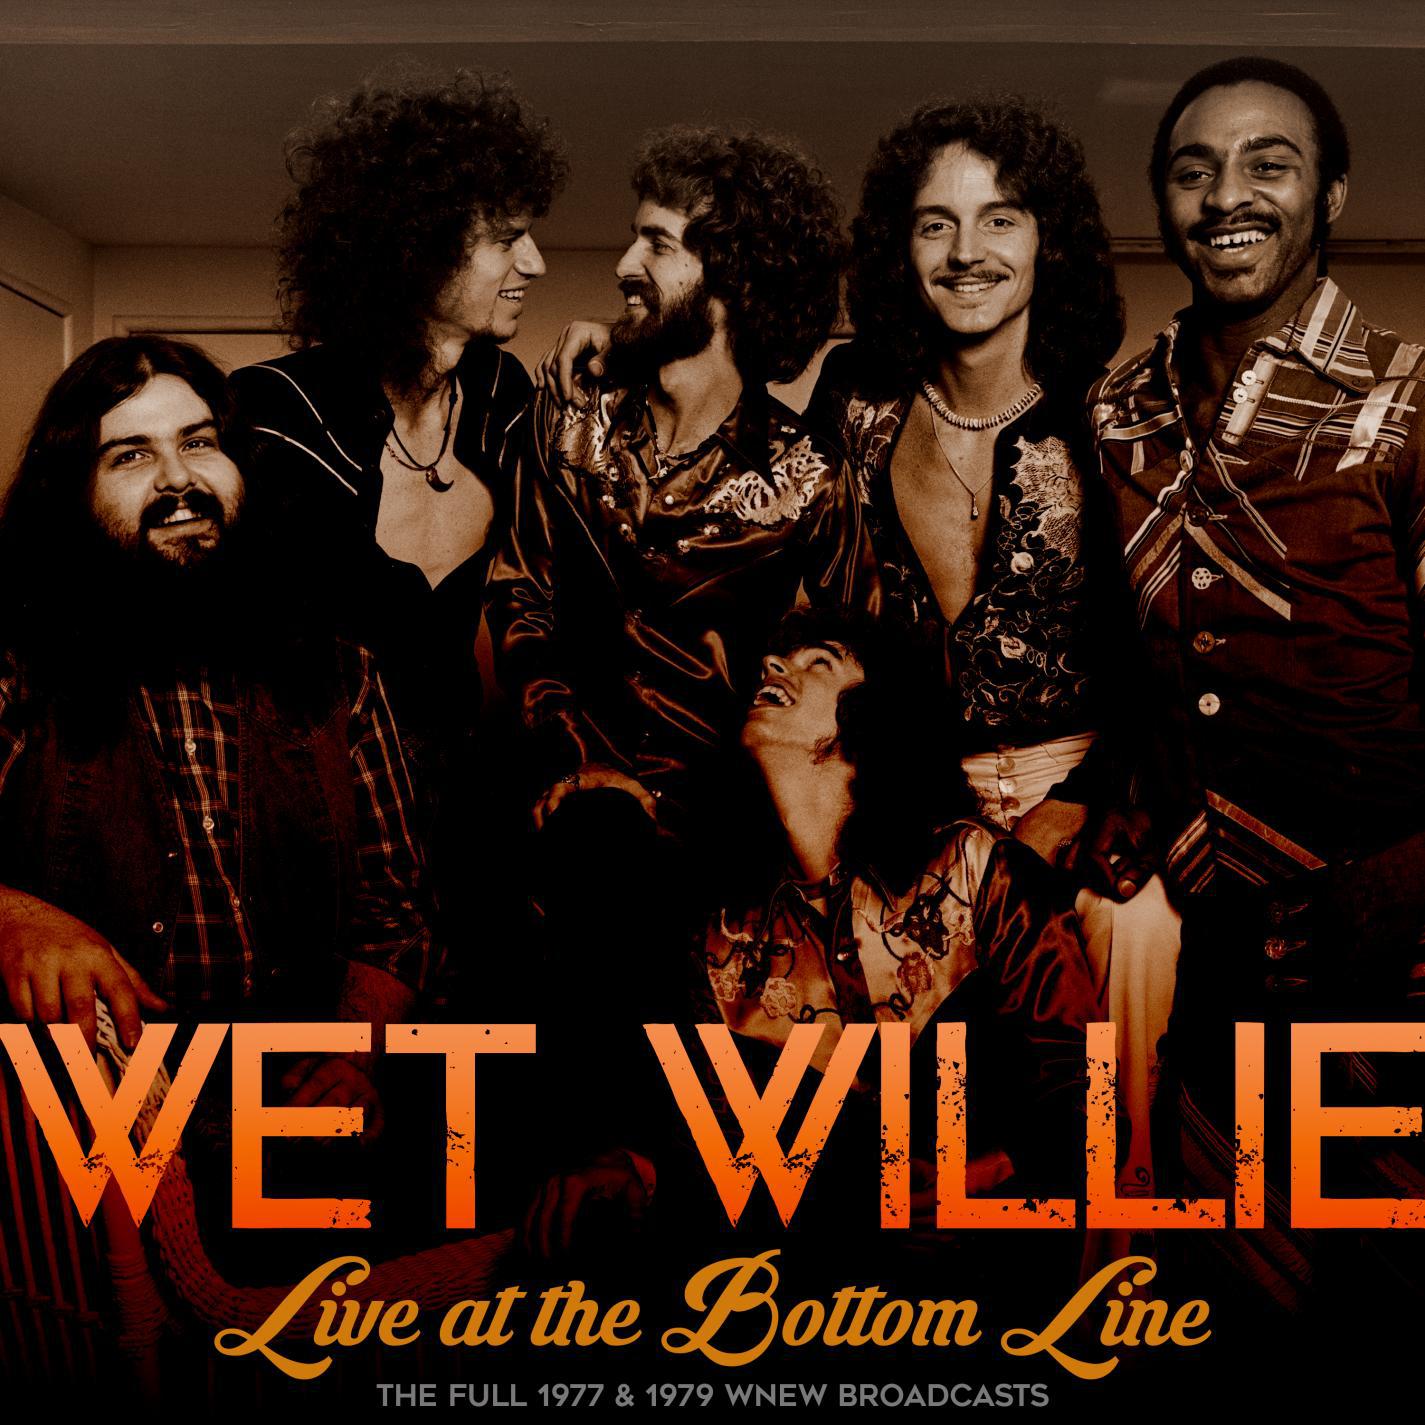 Wet Willie - Stop And Take A Look (Live 1979)